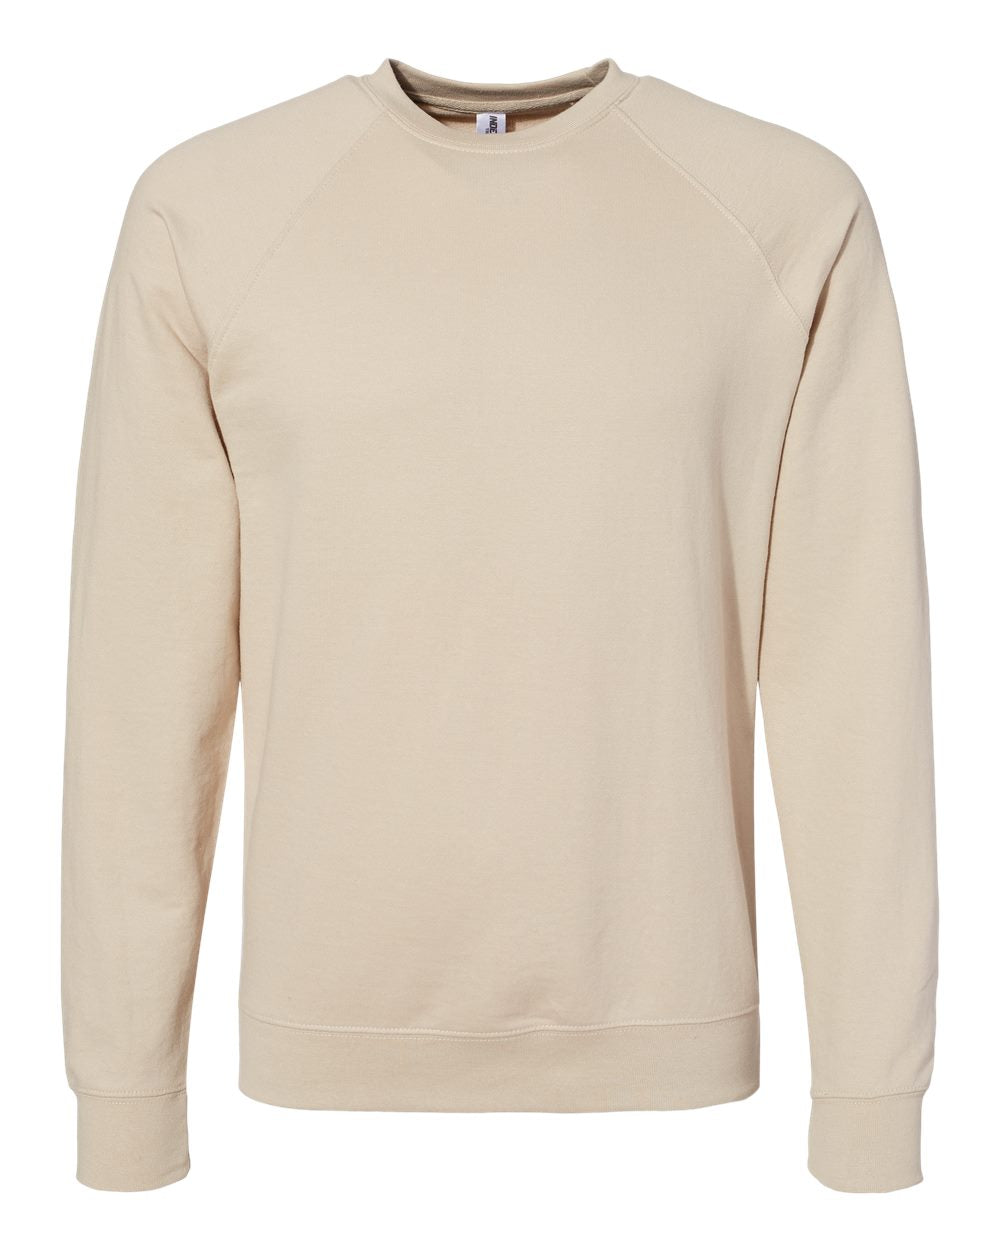 Independent Trading Co. Icon Unisex Lightweight Loopback Terry Crewneck Sweatshirt SS1000C #color_Sand